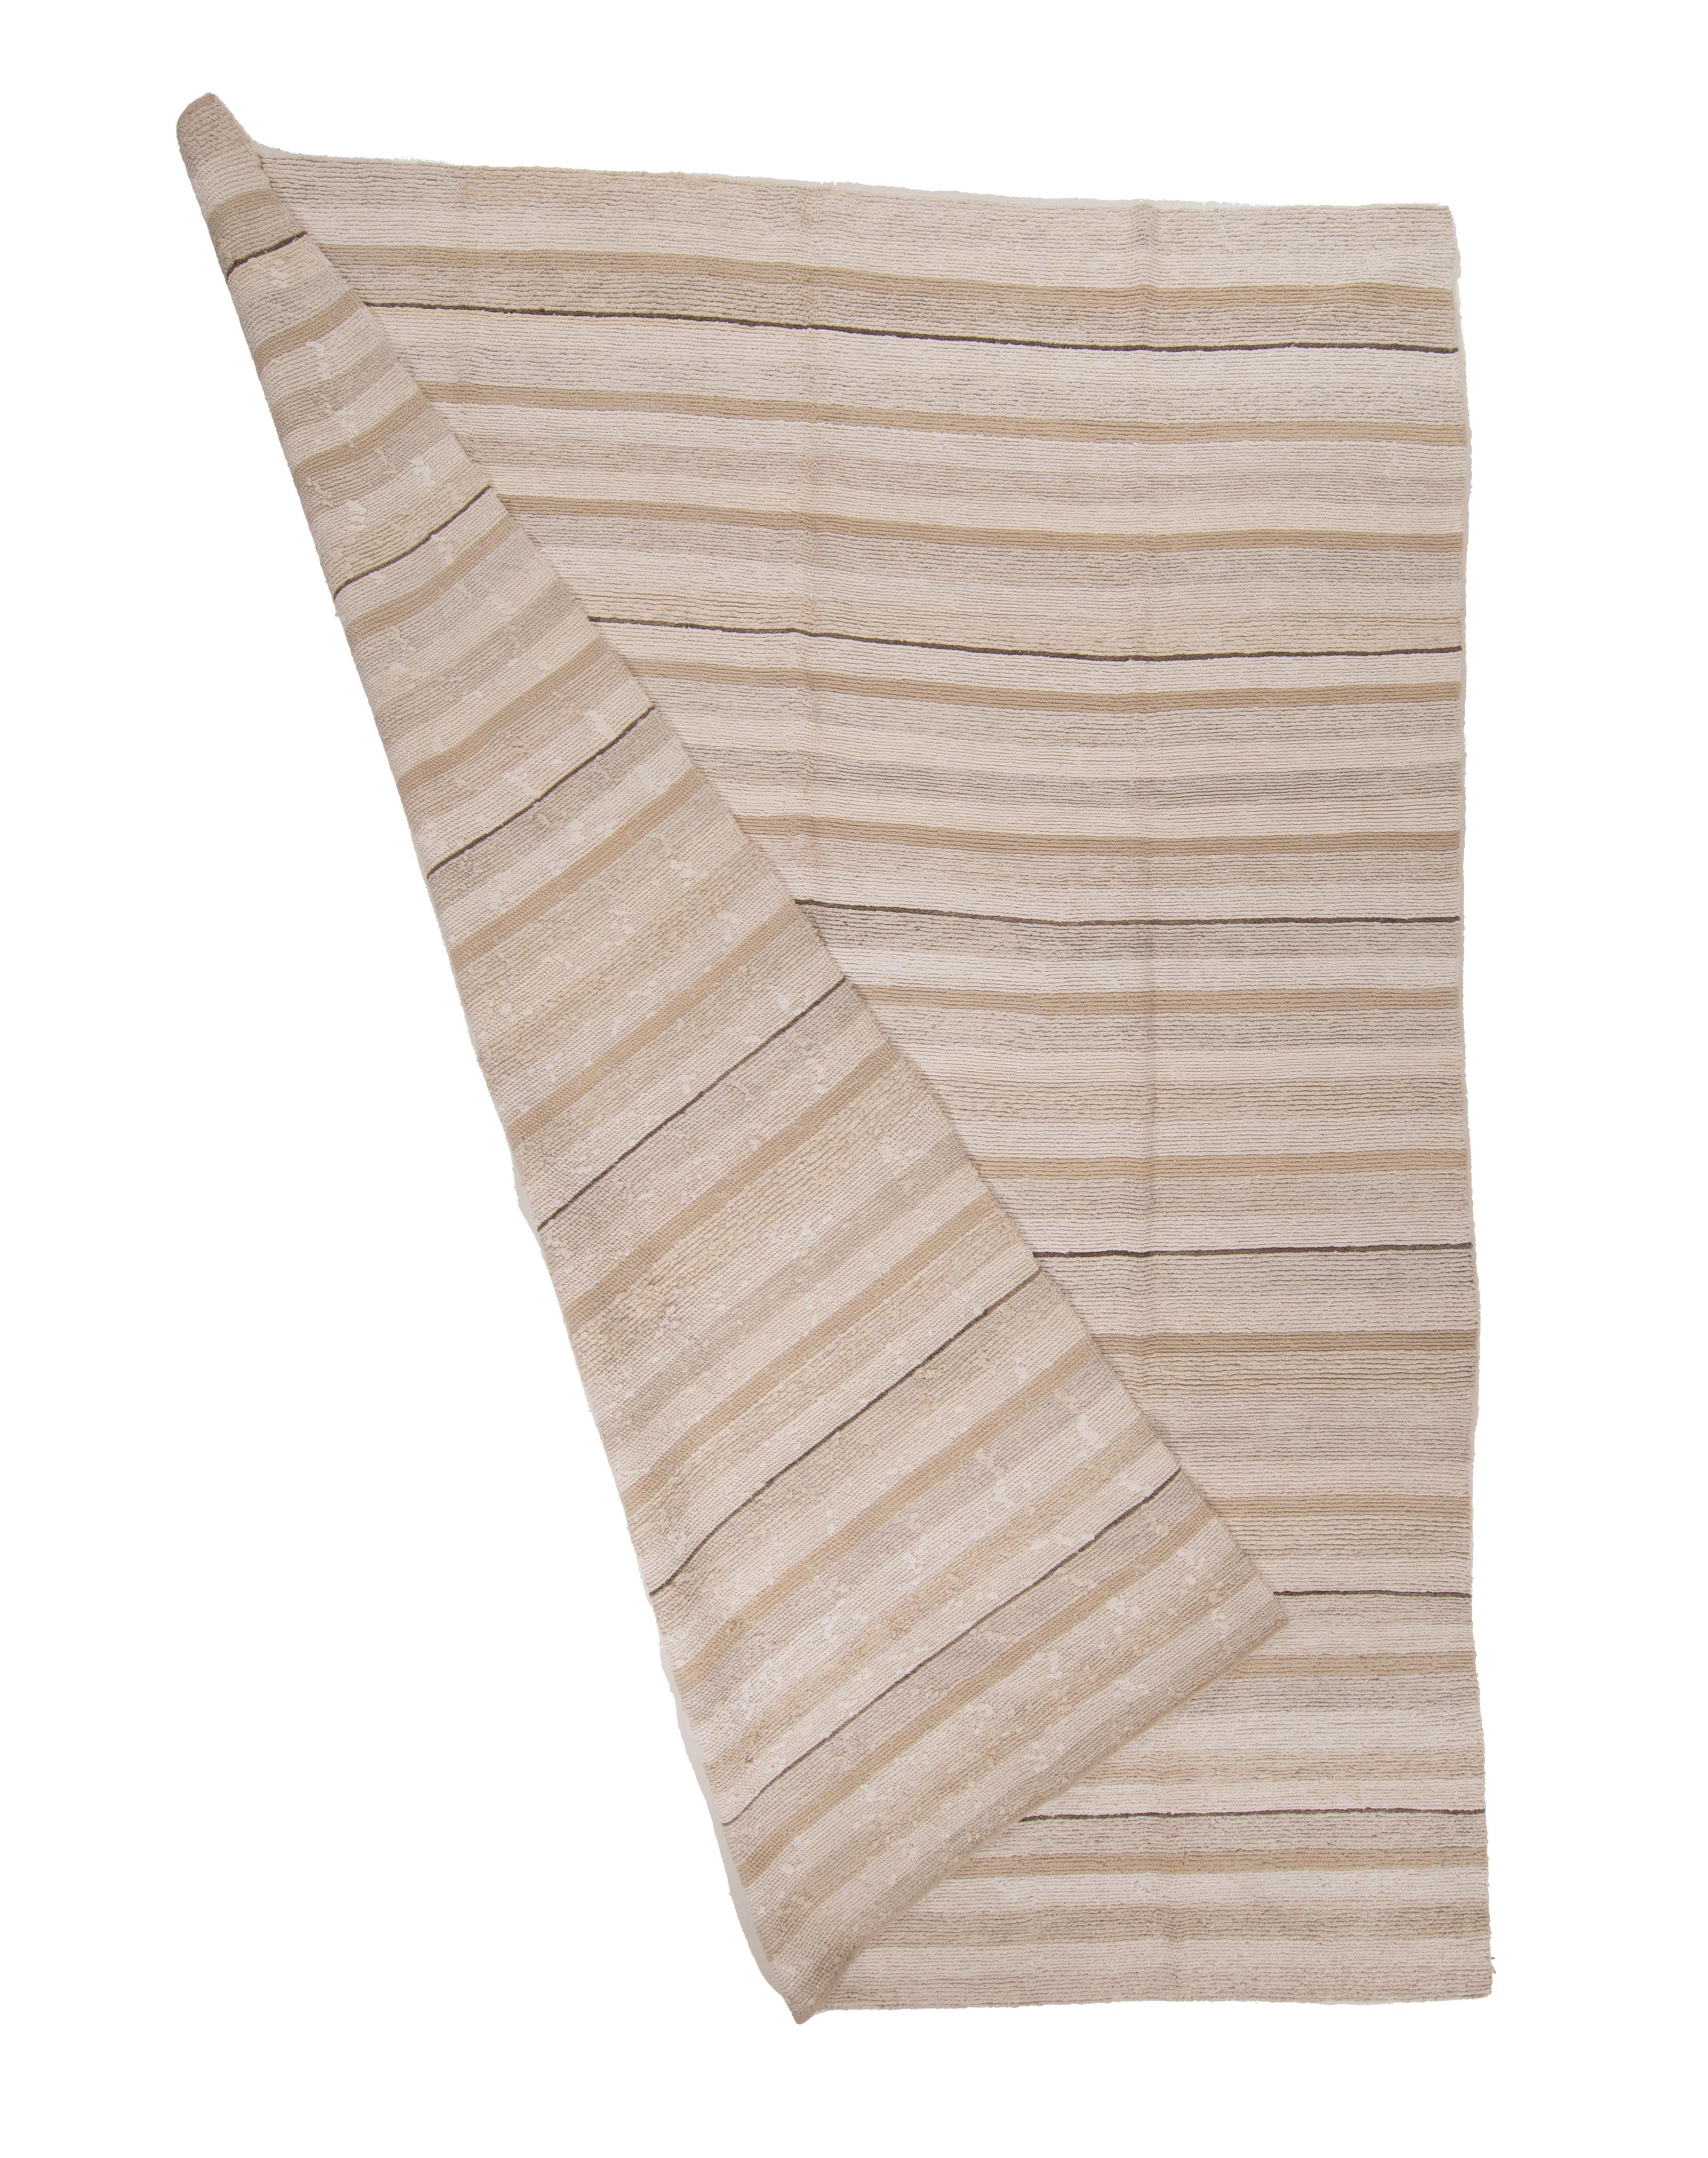 Hand-Woven Contemporary Turkish Large Sumak Rug Made with Recycled Hemp